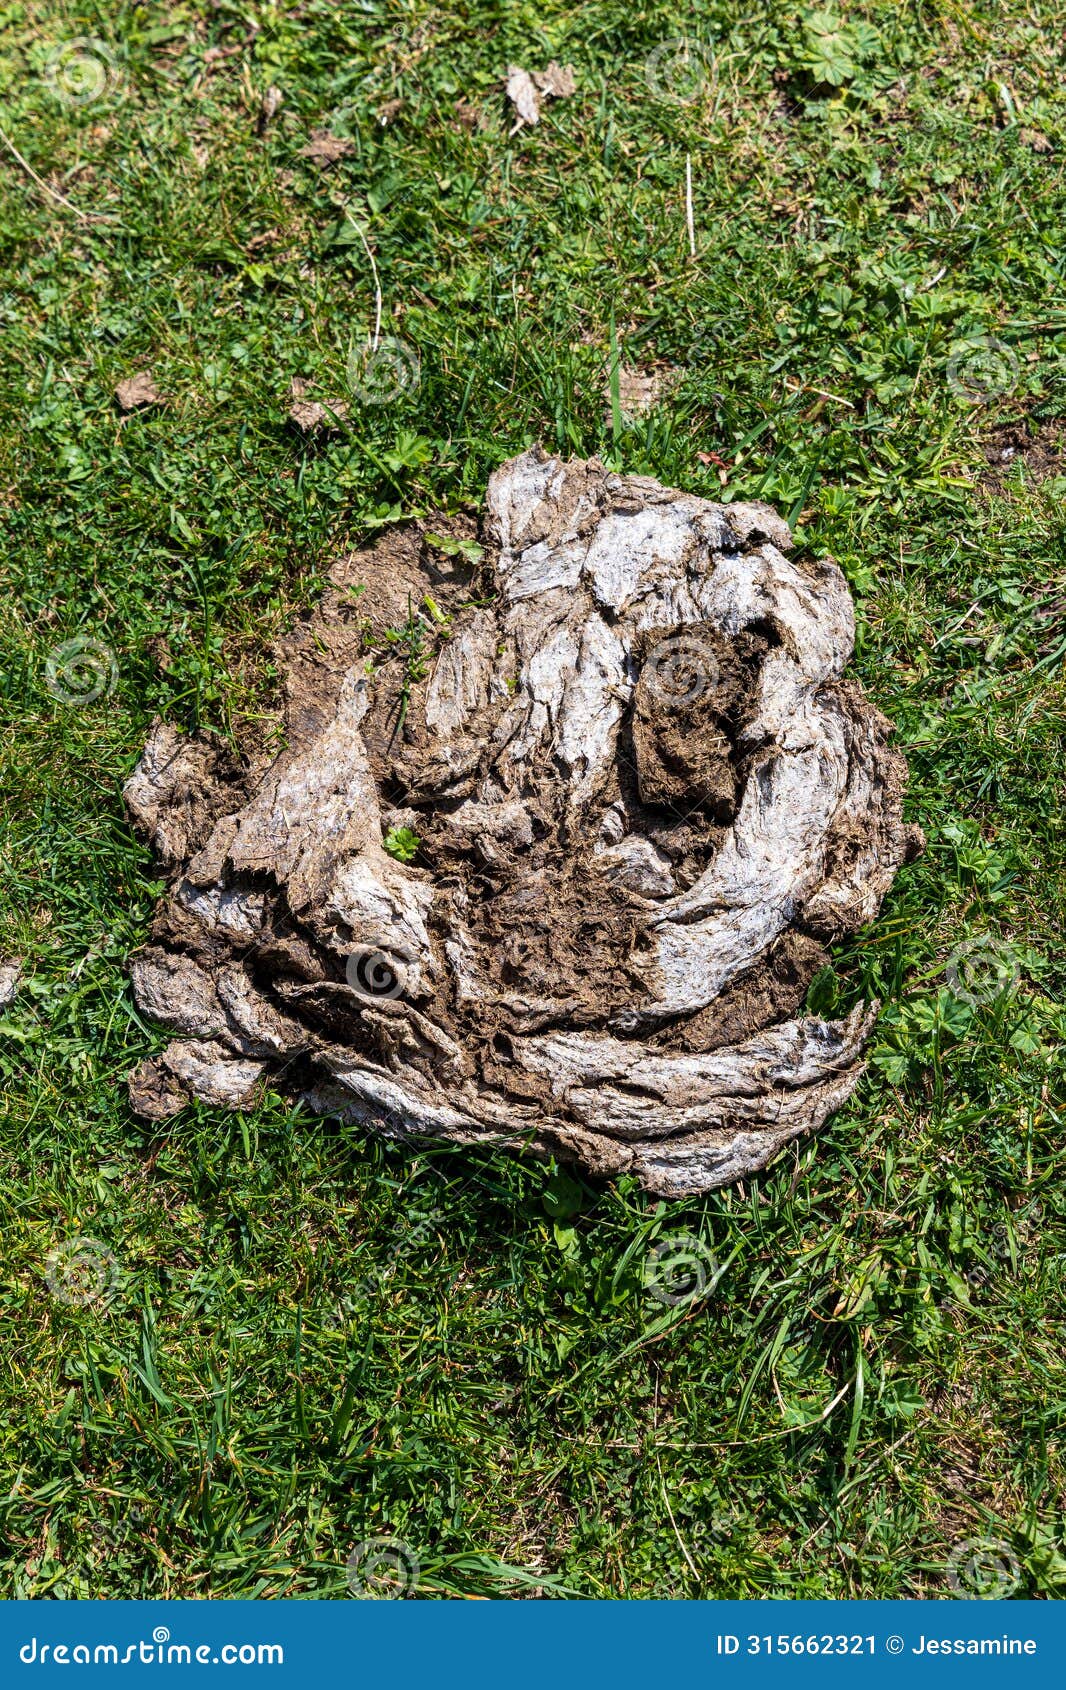 a pile of dry cow dung (cowpat) on green grass